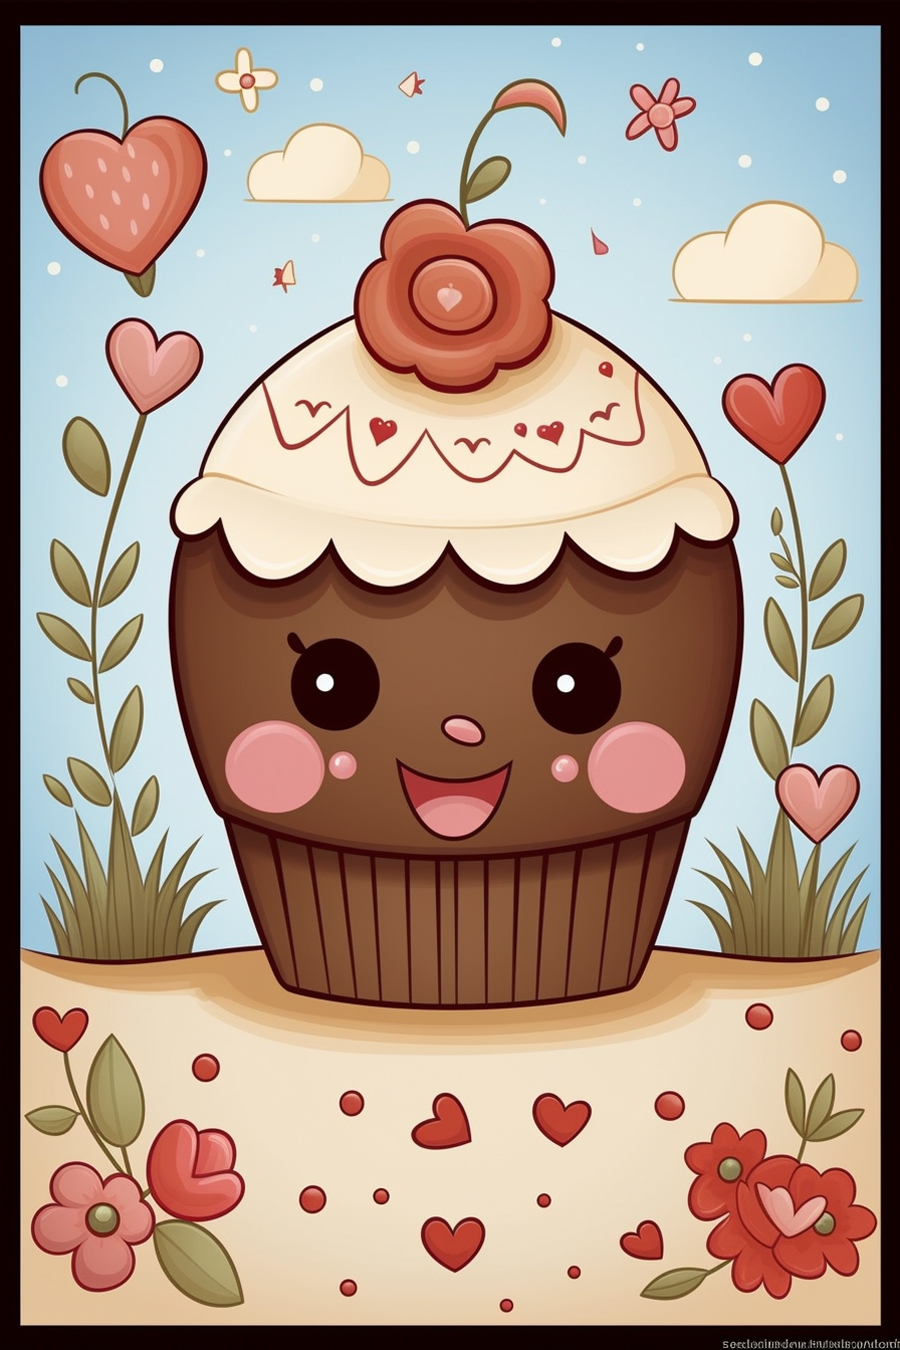 A cartoon cupcake with hearts and flowers.